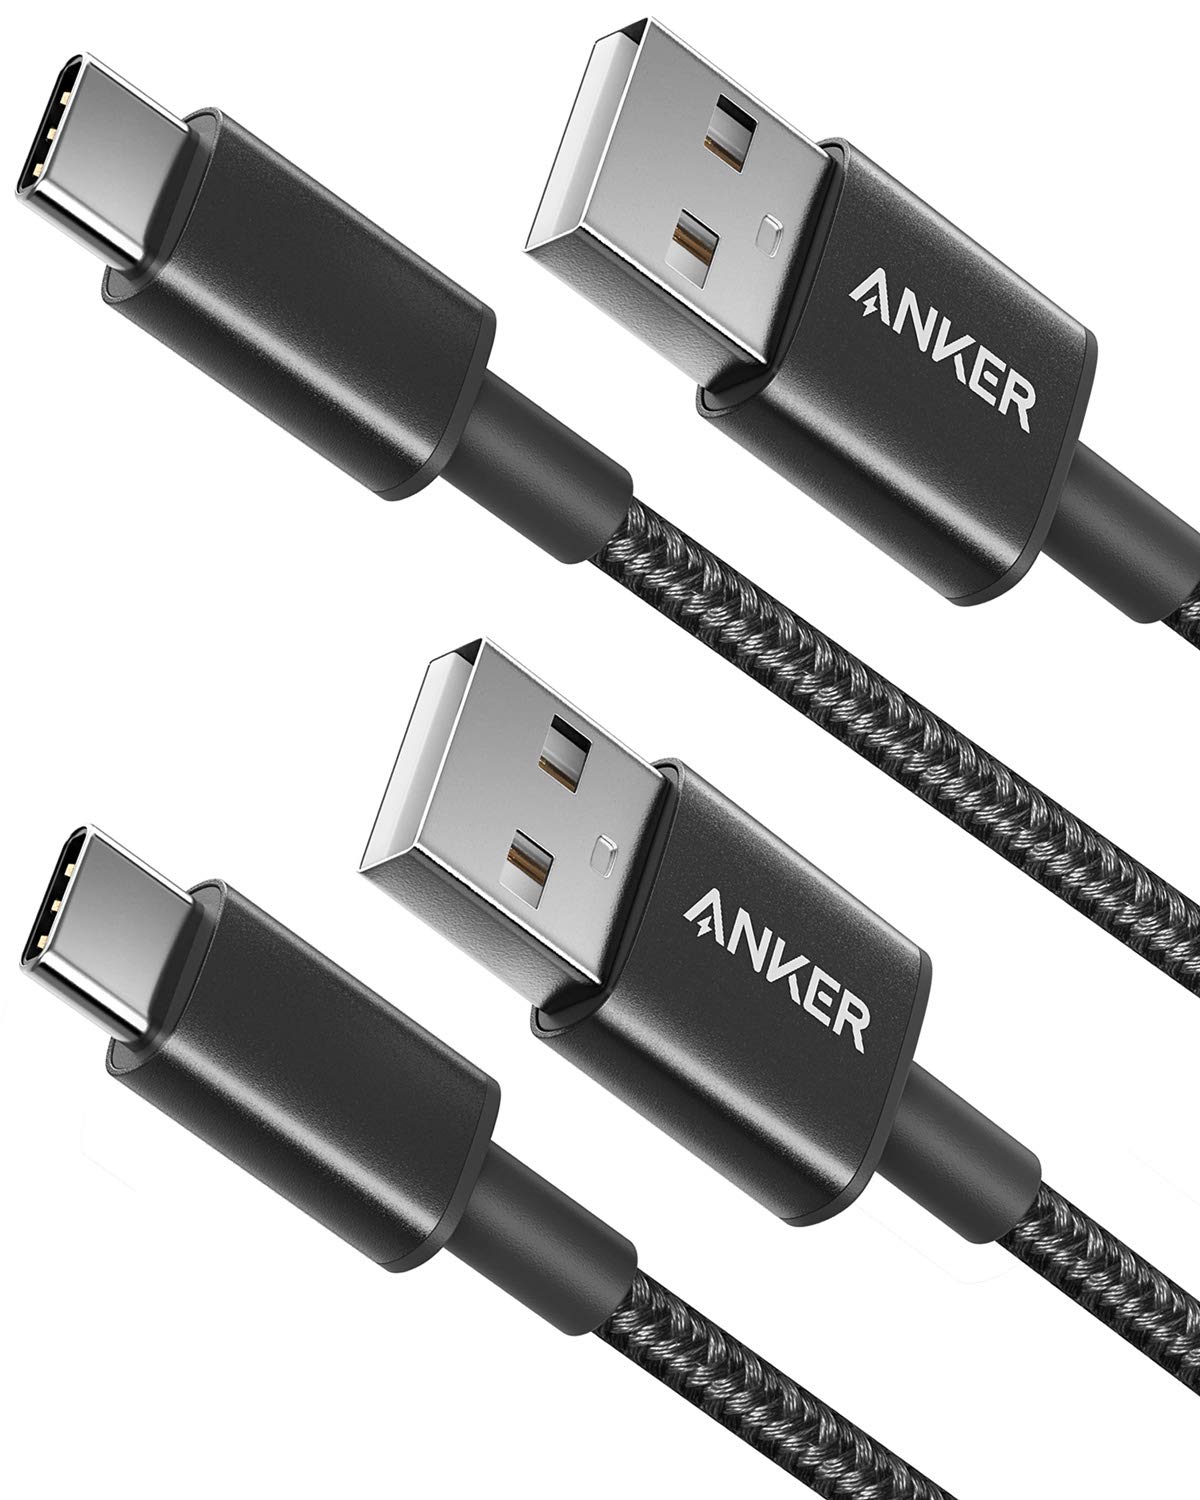 USB Type C Cable, Anker [2-Pack 6Ft] Premium Nylon USB-C to USB-A Fast Charging Type C Cable, for Samsung Galaxy S10 / S9 / S8 / Note 8, LG V20 / G5 / G6 and More(Black)